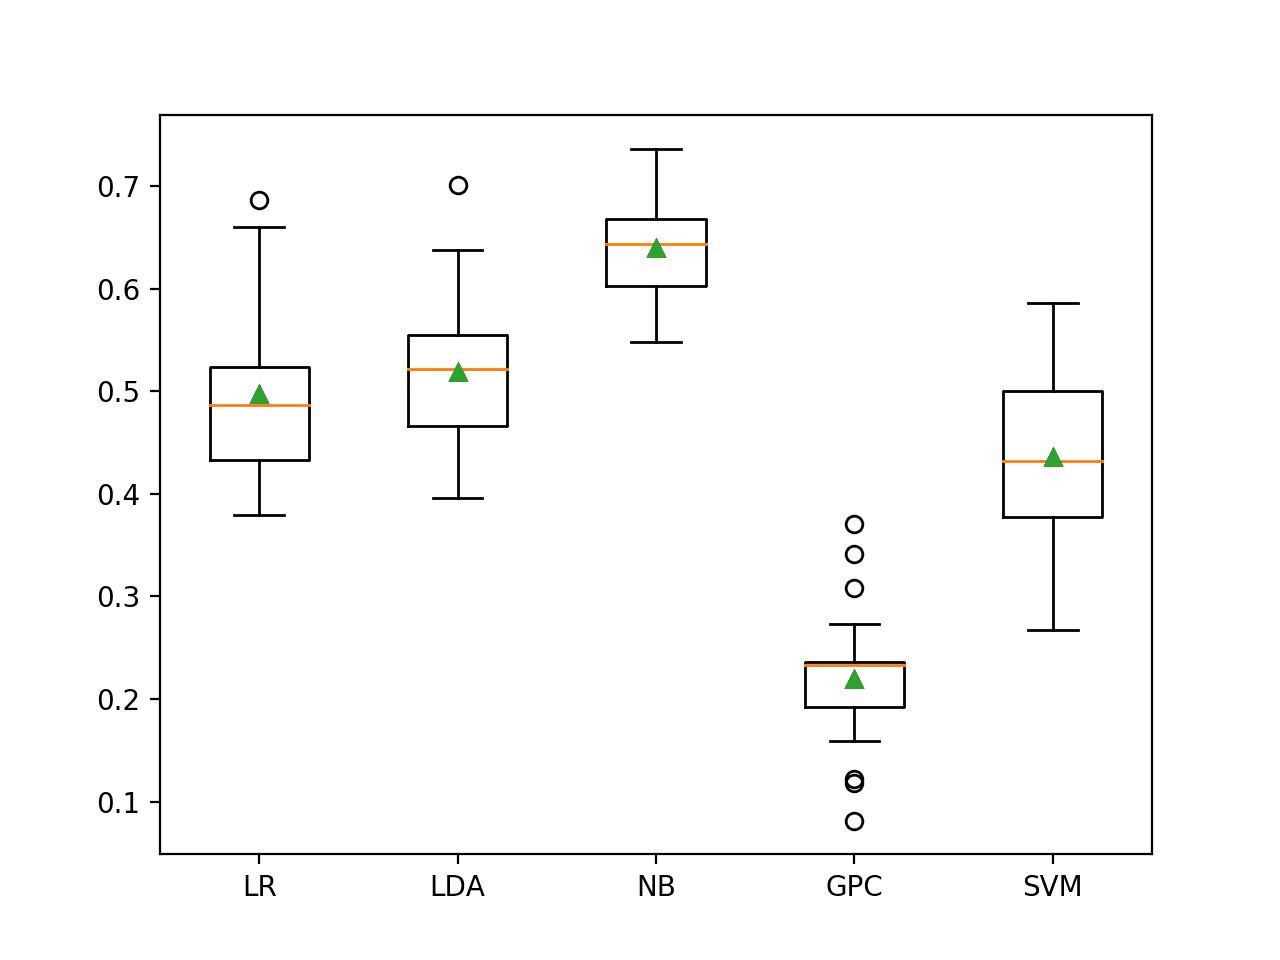 Box and Whisker Plot of Machine Learning Models on the Imbalanced German Credit Dataset